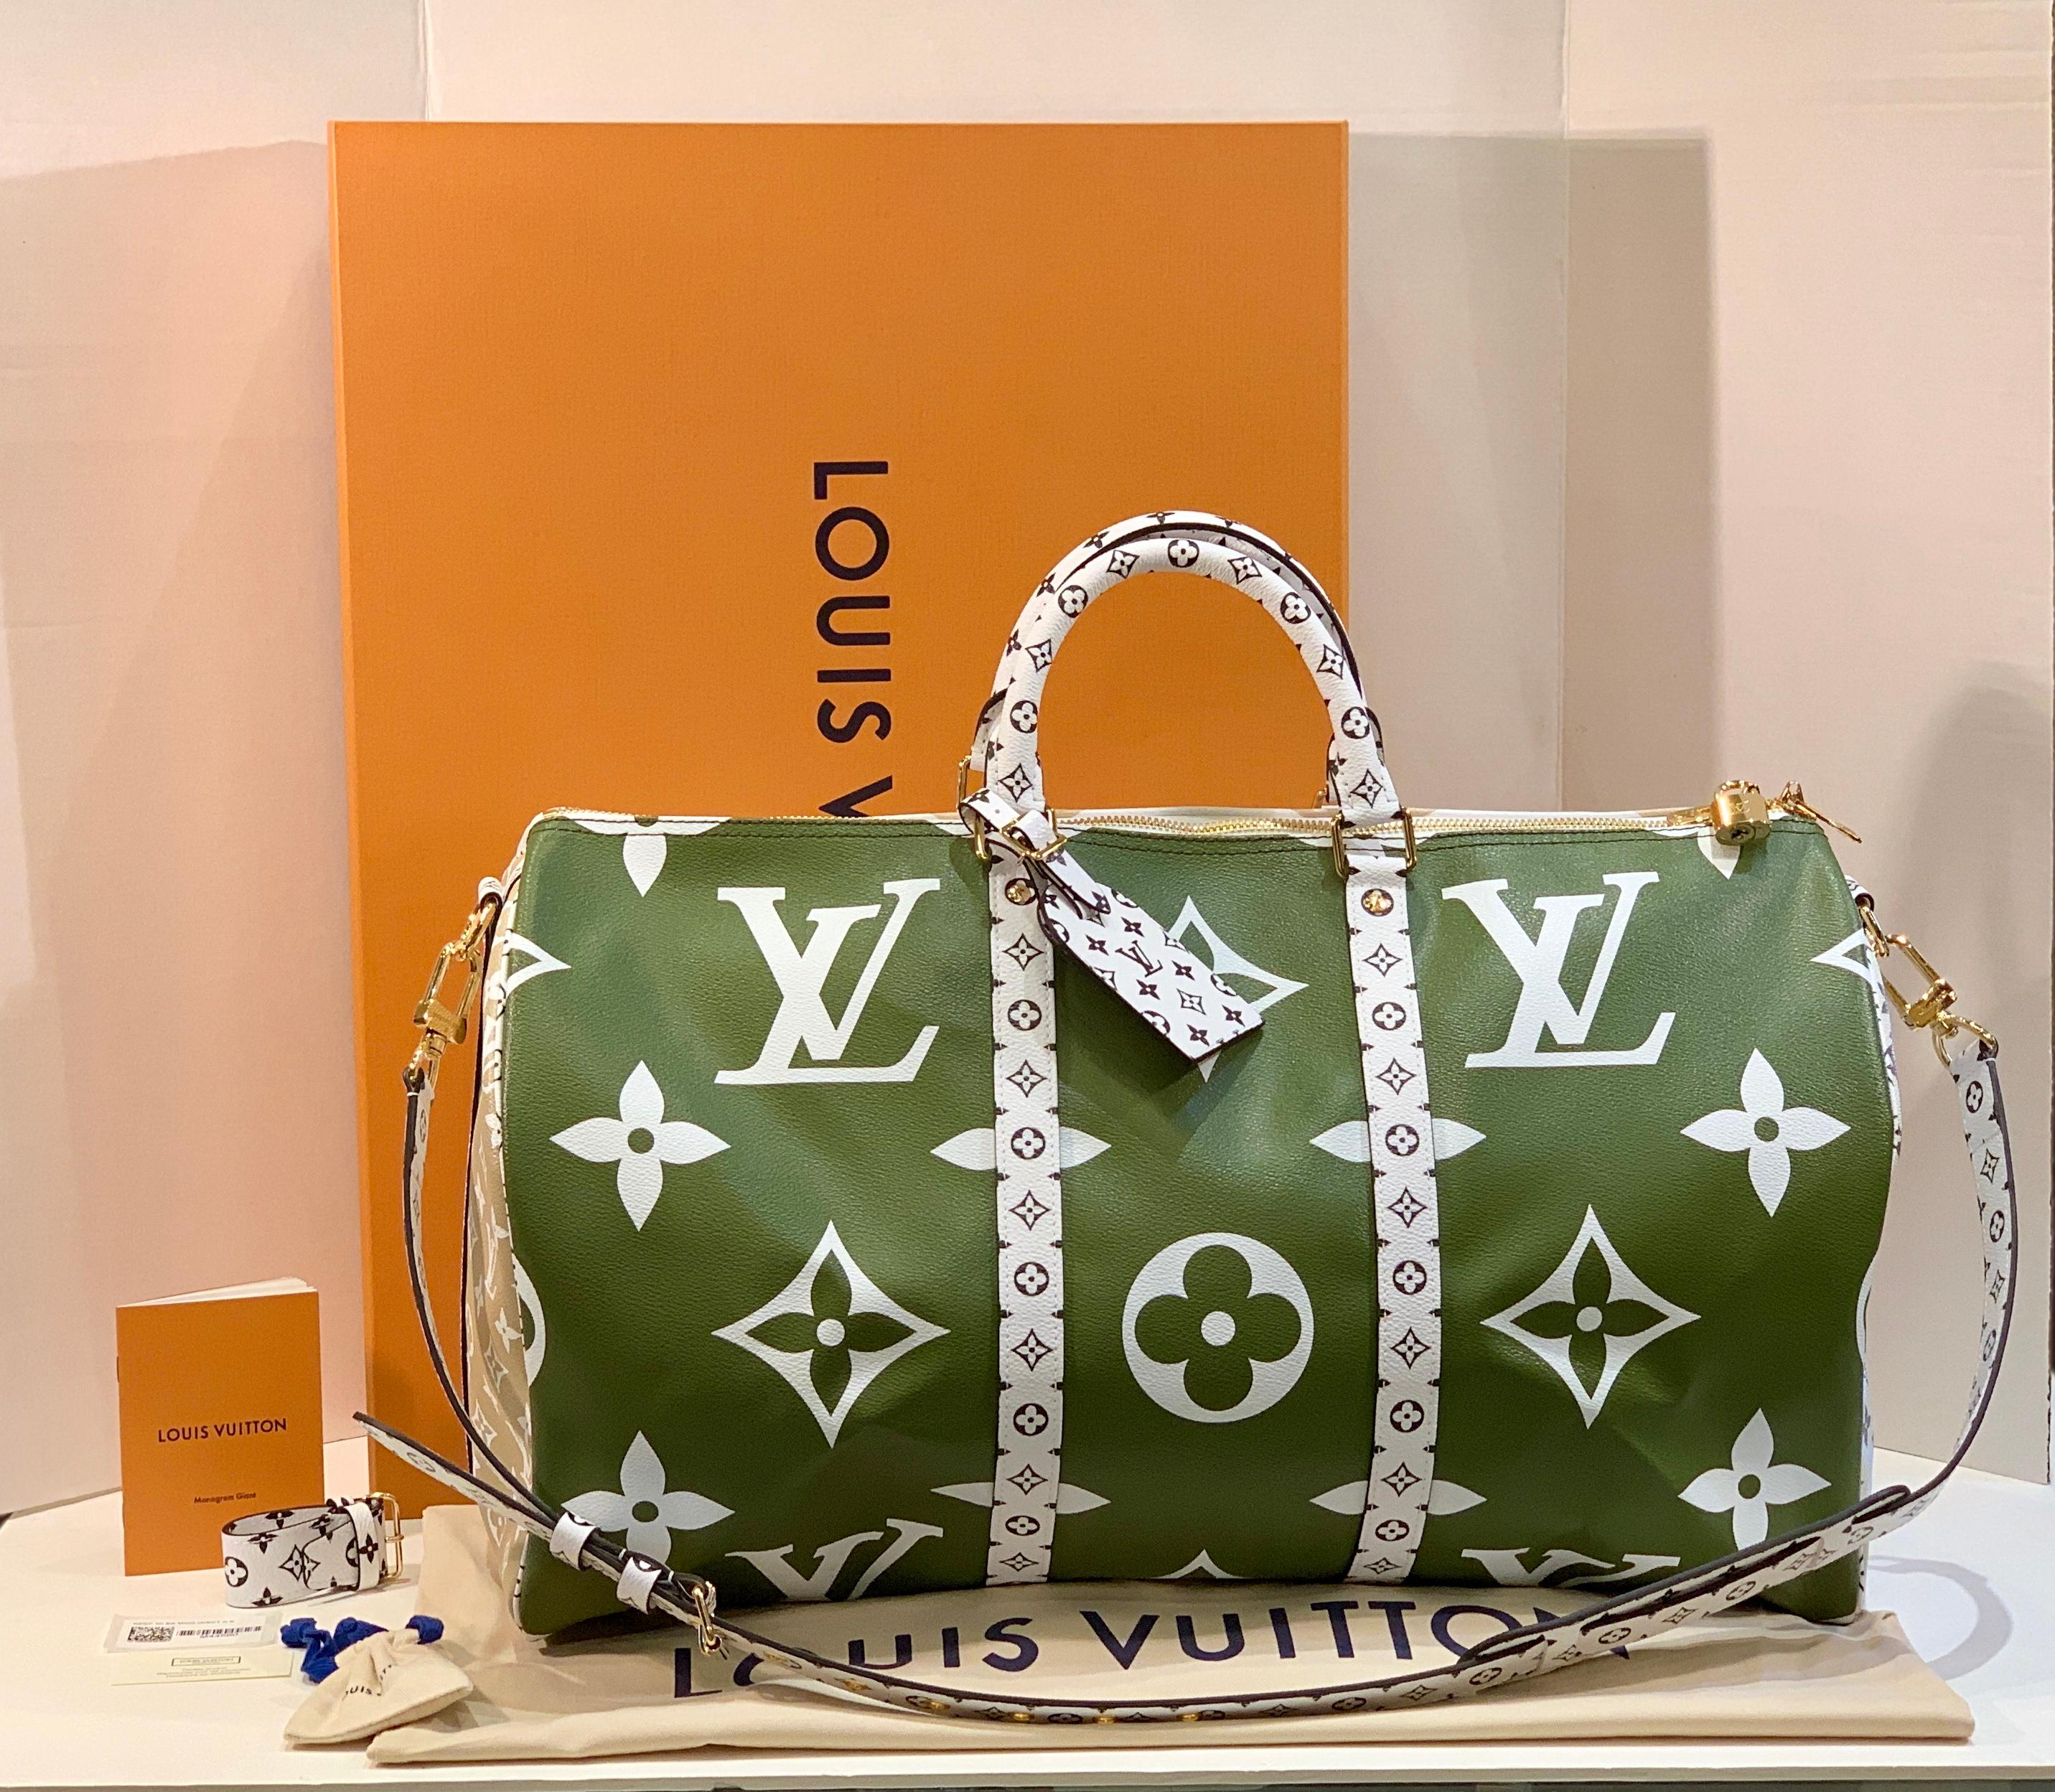 Get the bag thousands of people are waiting for!  Brand  new and never used, with all tags, papers and packaging materials.

From the Louis Vuitton website, “For Summer 2019, Louis Vuitton reinvents the Keepall Bandoulière 50 bag in a new bold